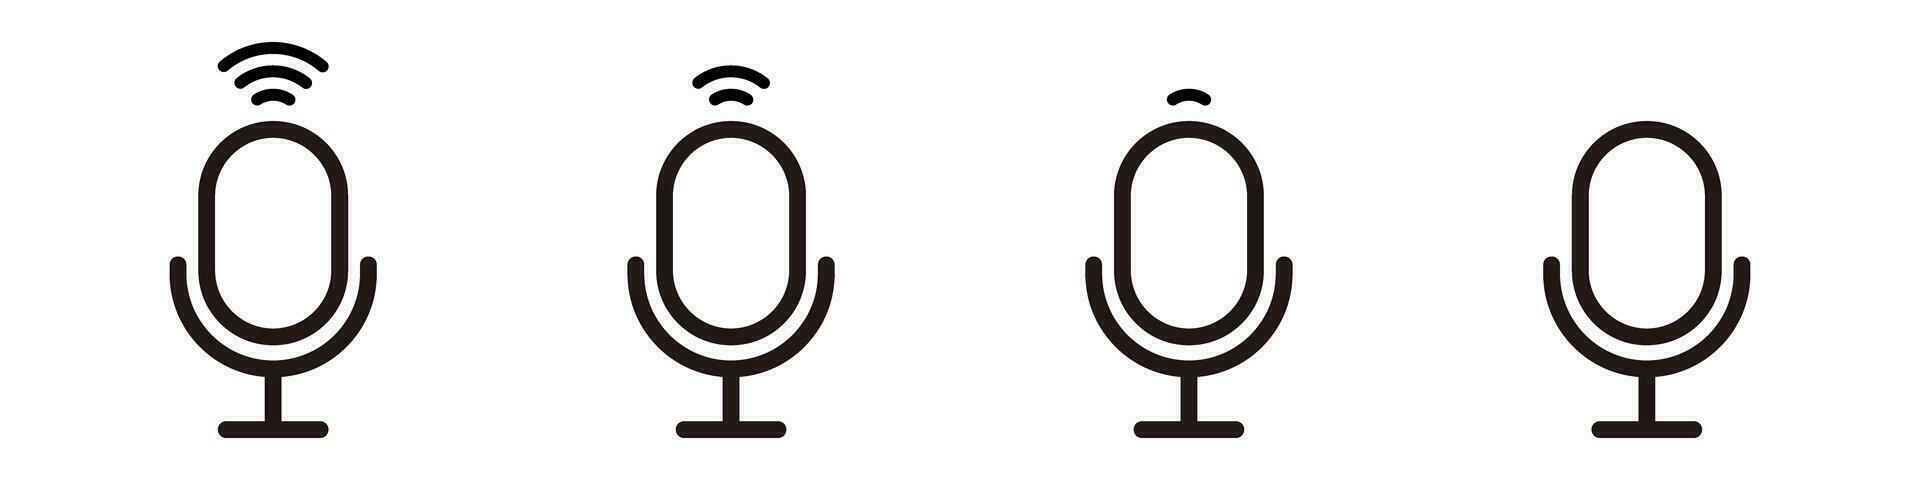 Microphone icon set with different sound wave levels. Vector. vector